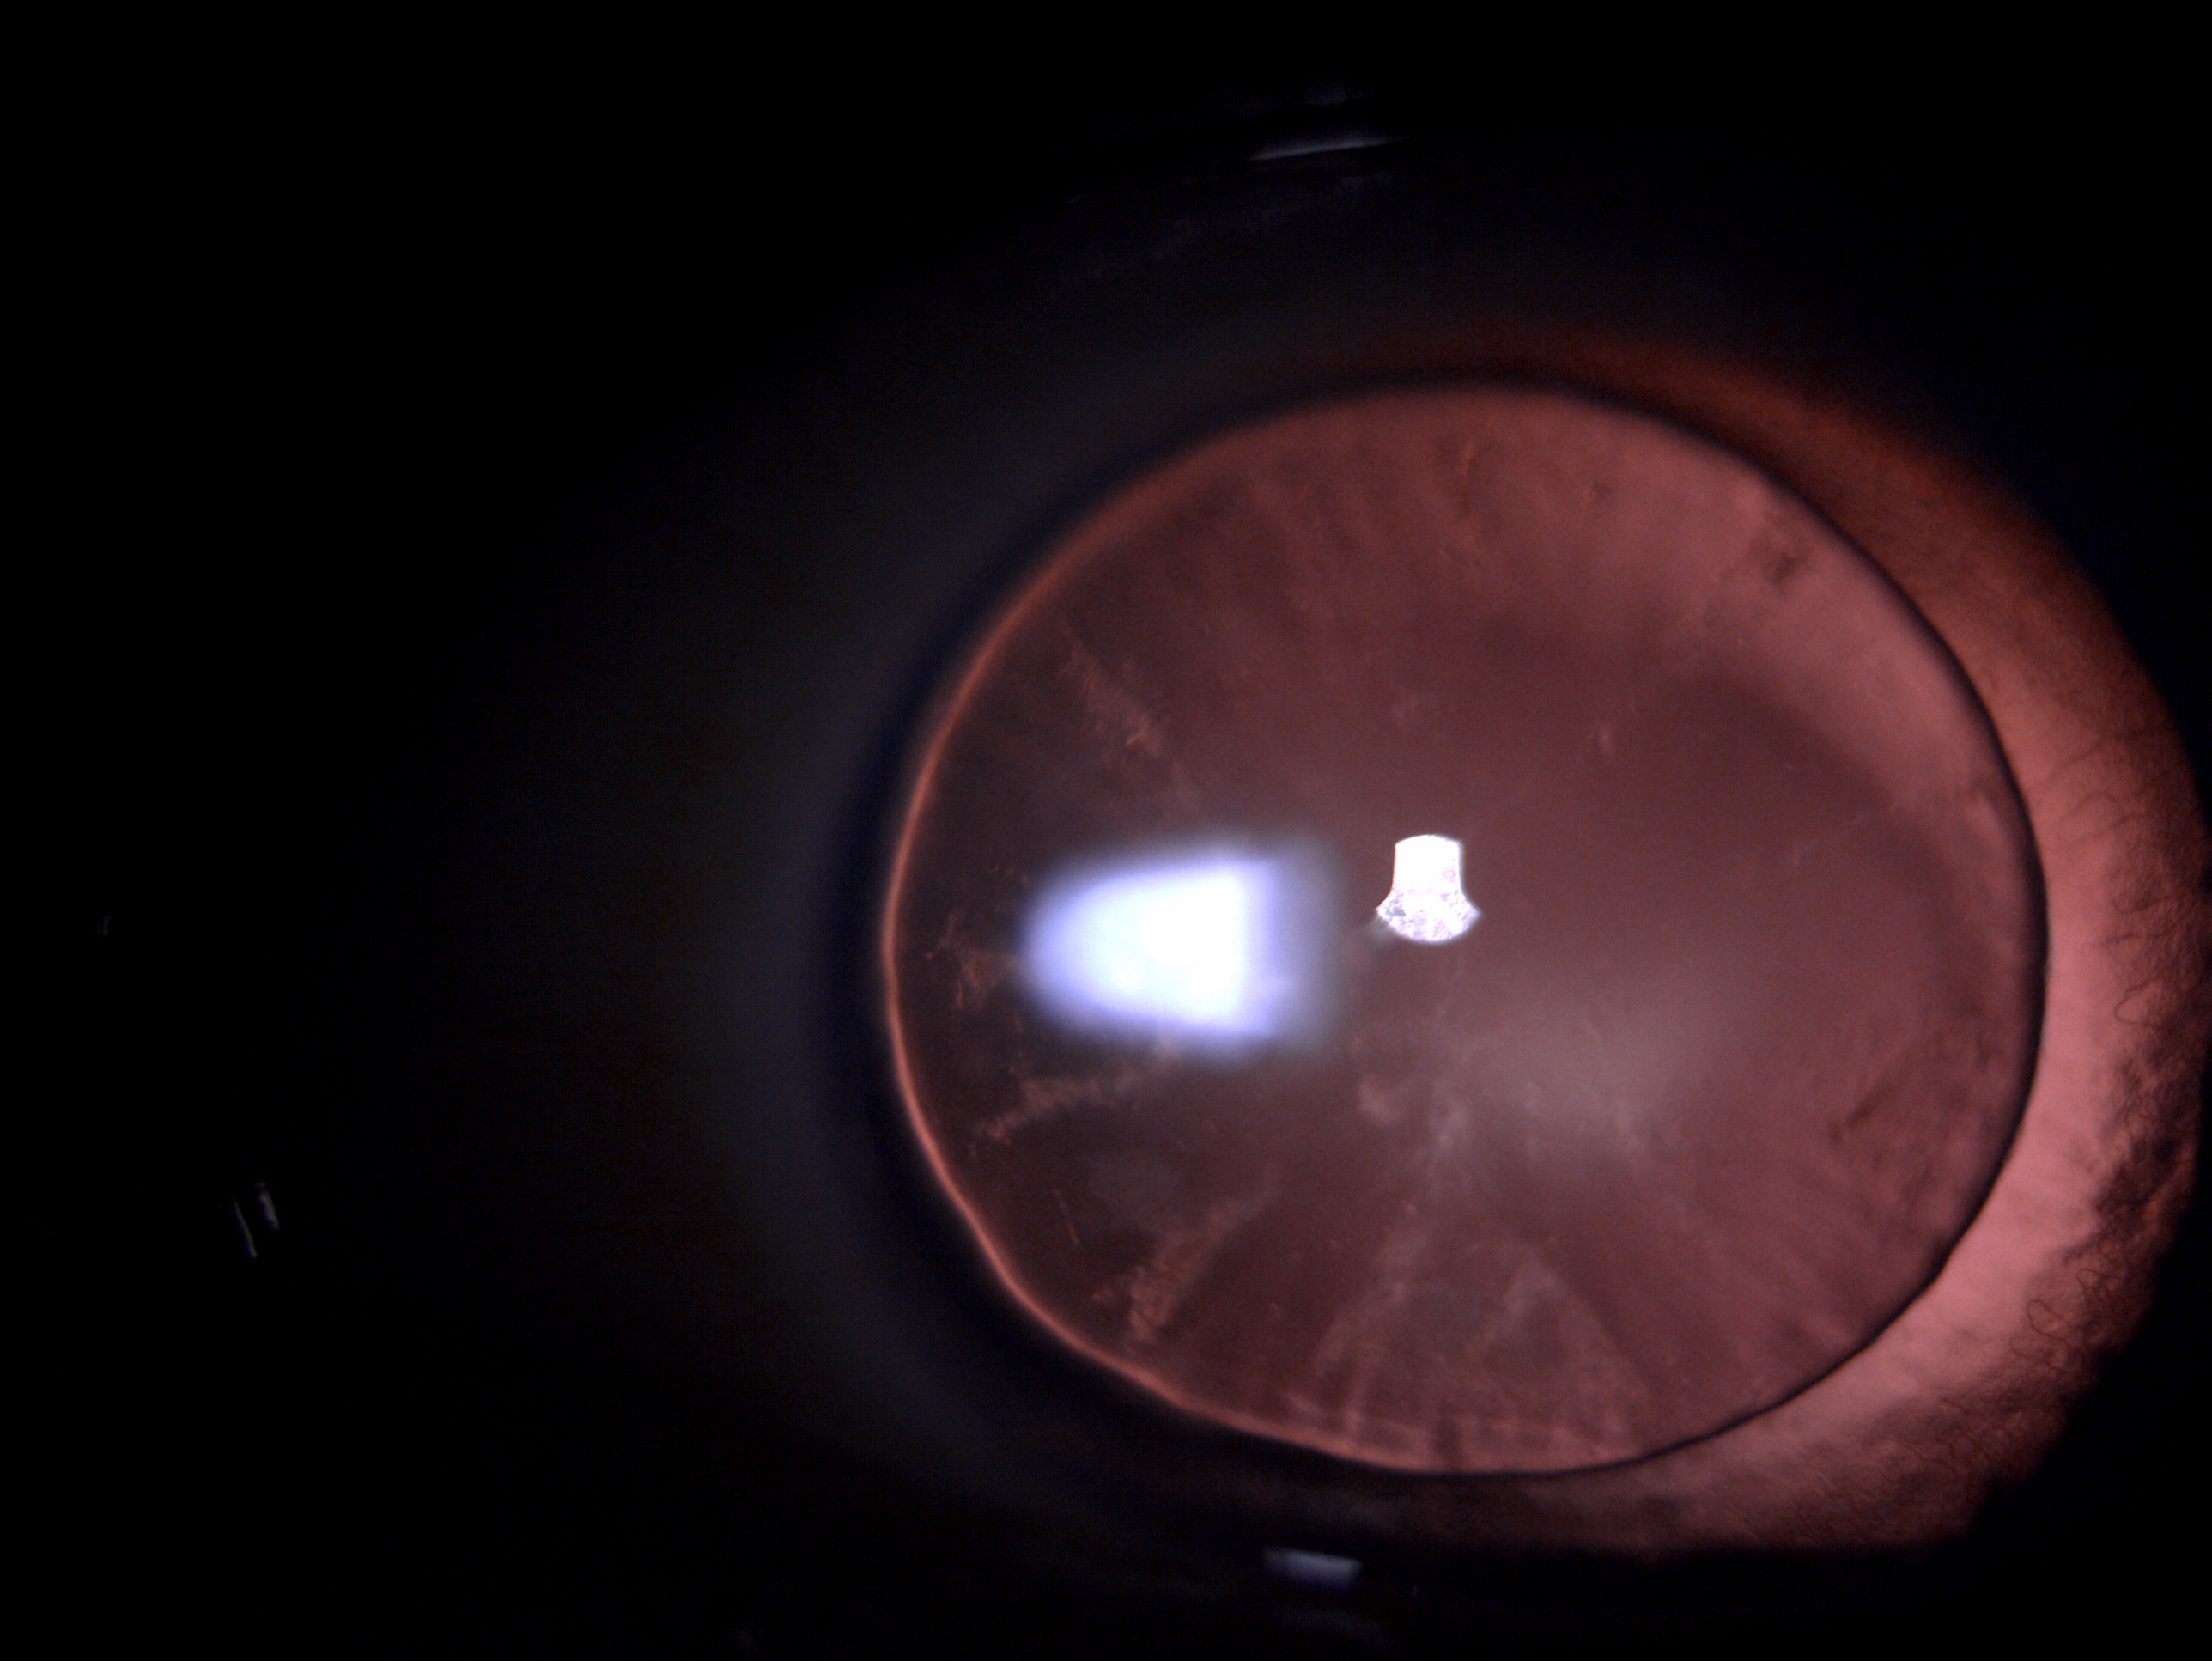 Retro-illumination slit lamp image of the patient depicting small diameter microspherophakic lens with an equator of lens vis